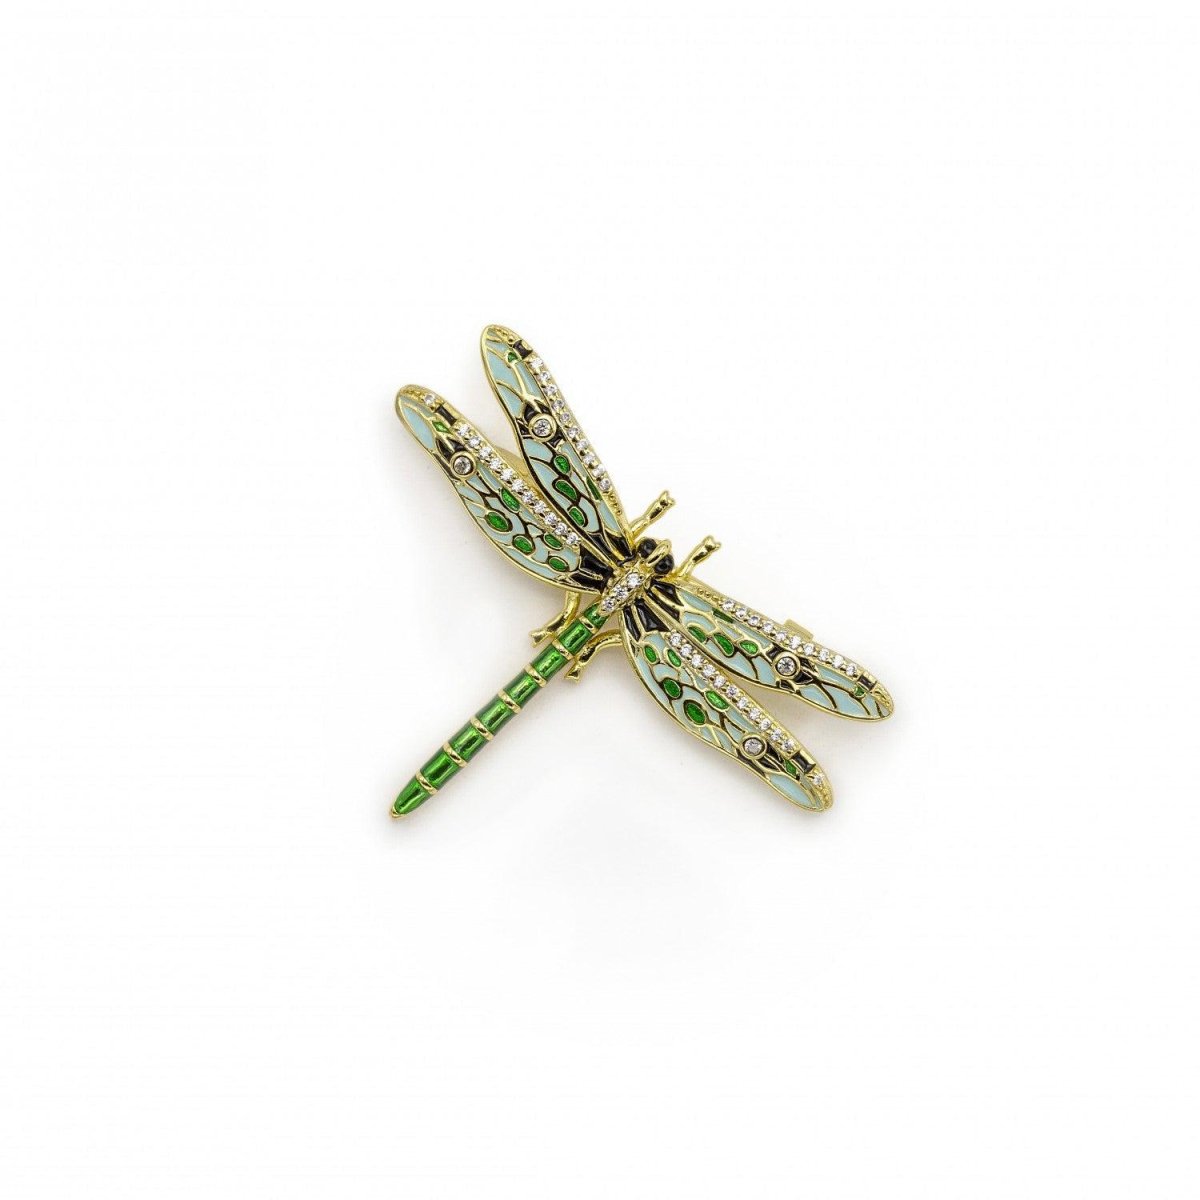 Brooch - Gold plated silver brooch with a dragonfly design composed of multicolored zircons